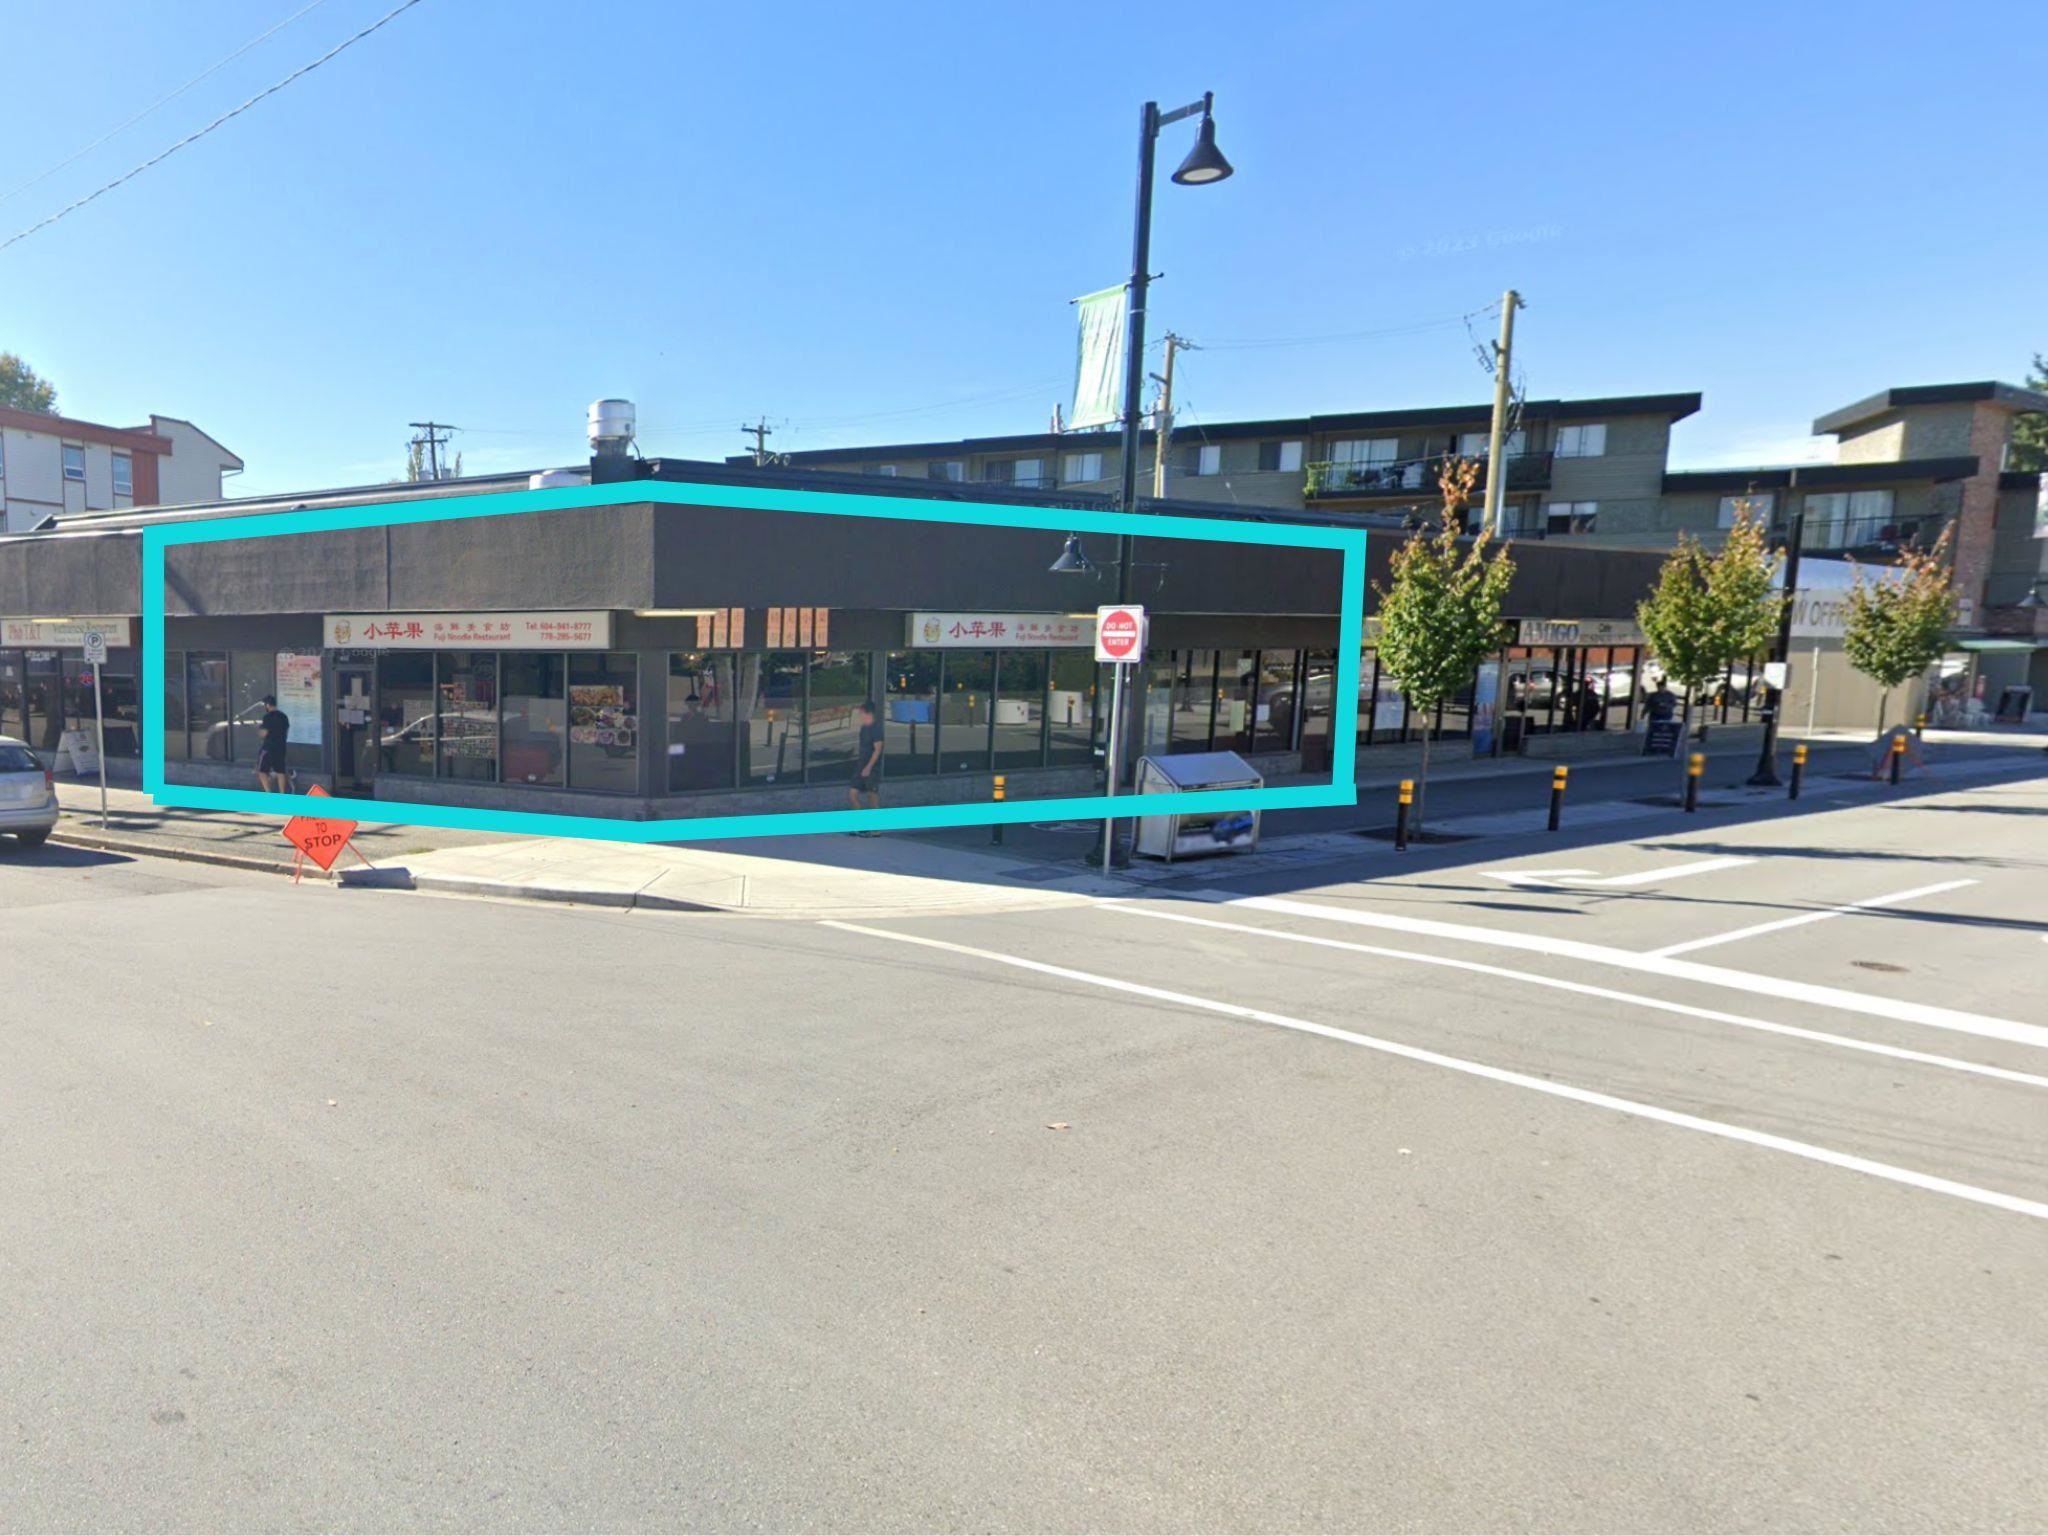 Central Pt Coquitlam Land Commercial for sale:    (Listed 6800-05-11)